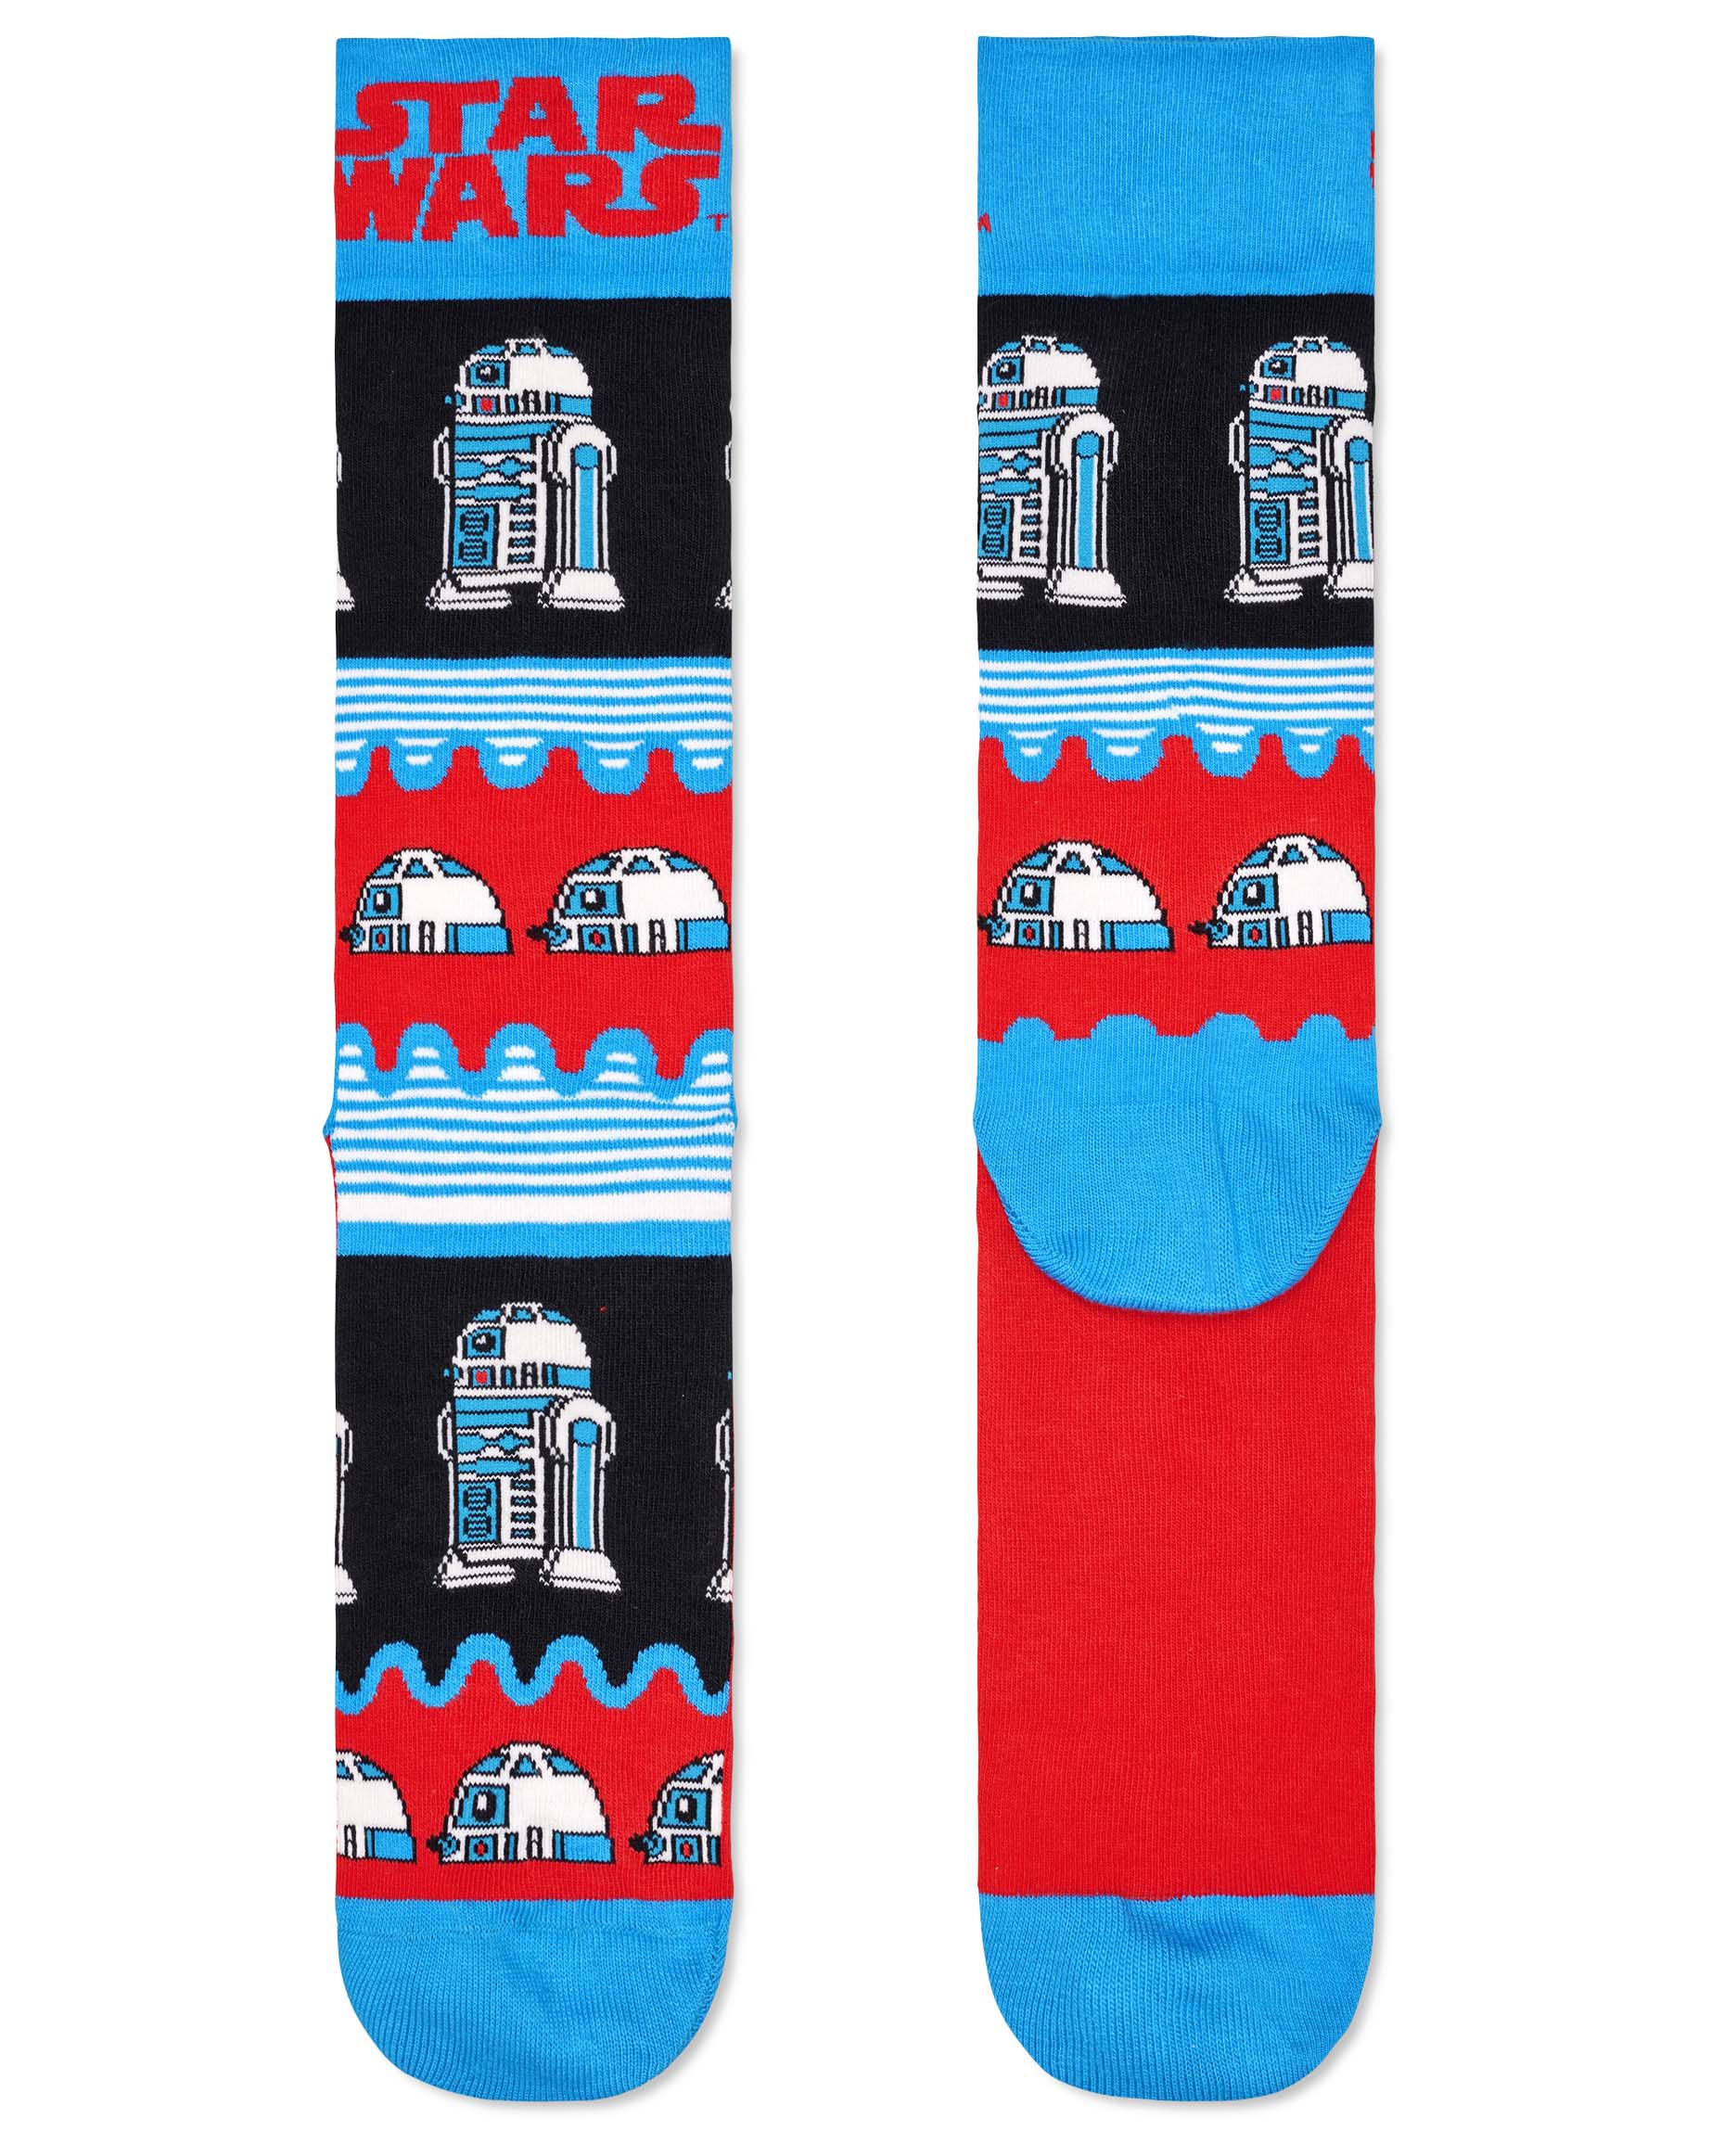 Happy Socks Sock - Star Wars themed socks in light blue, red, navy and white Star Wars themed socks featuring the R2D2 droid character.